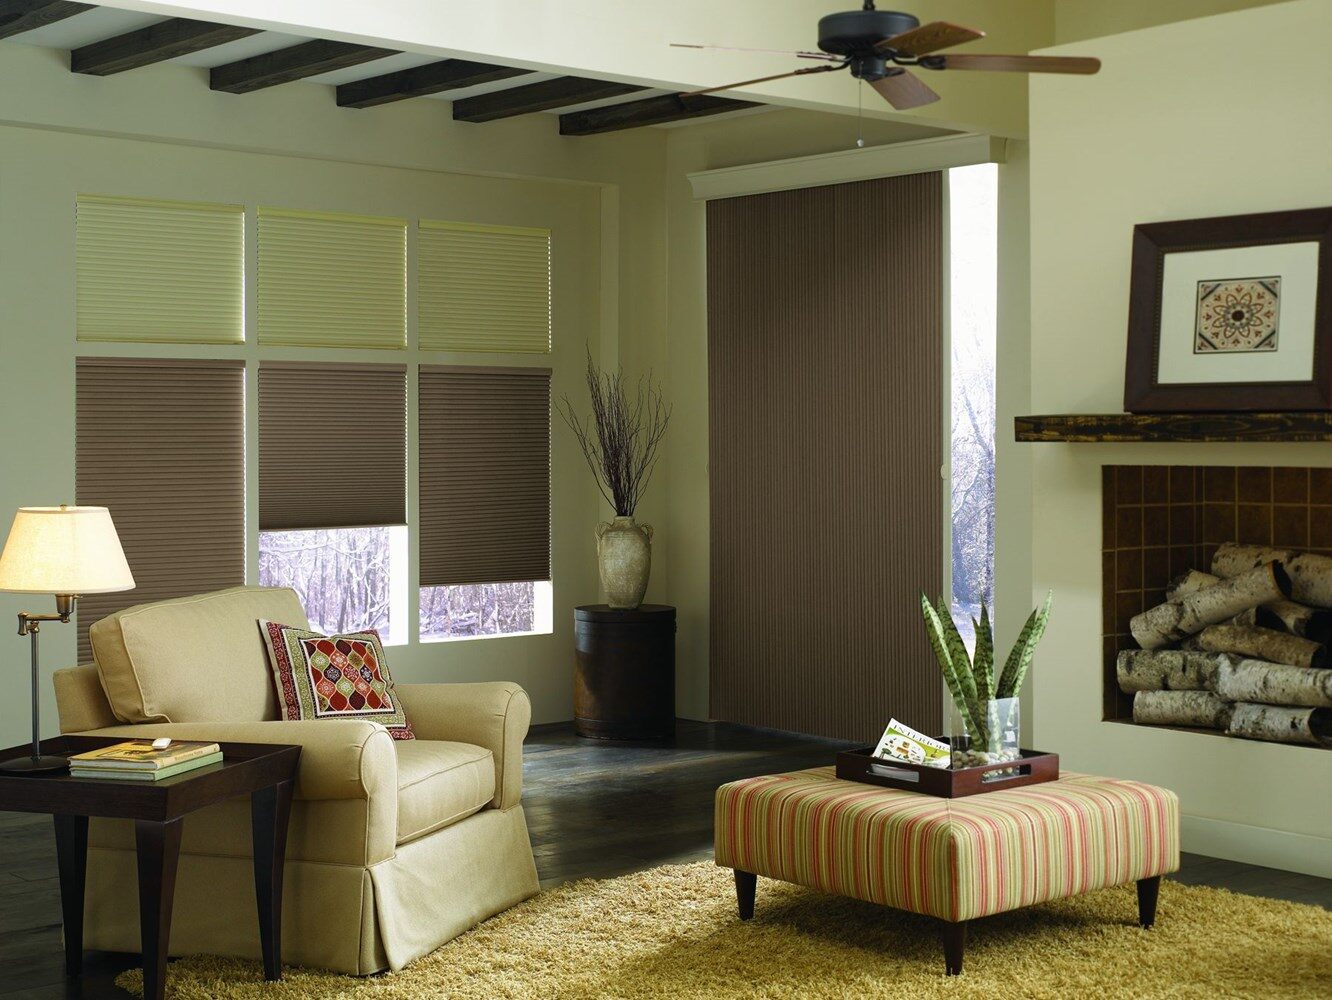 Bali 1/2 double cell Vertical Cell shade called Hideaway